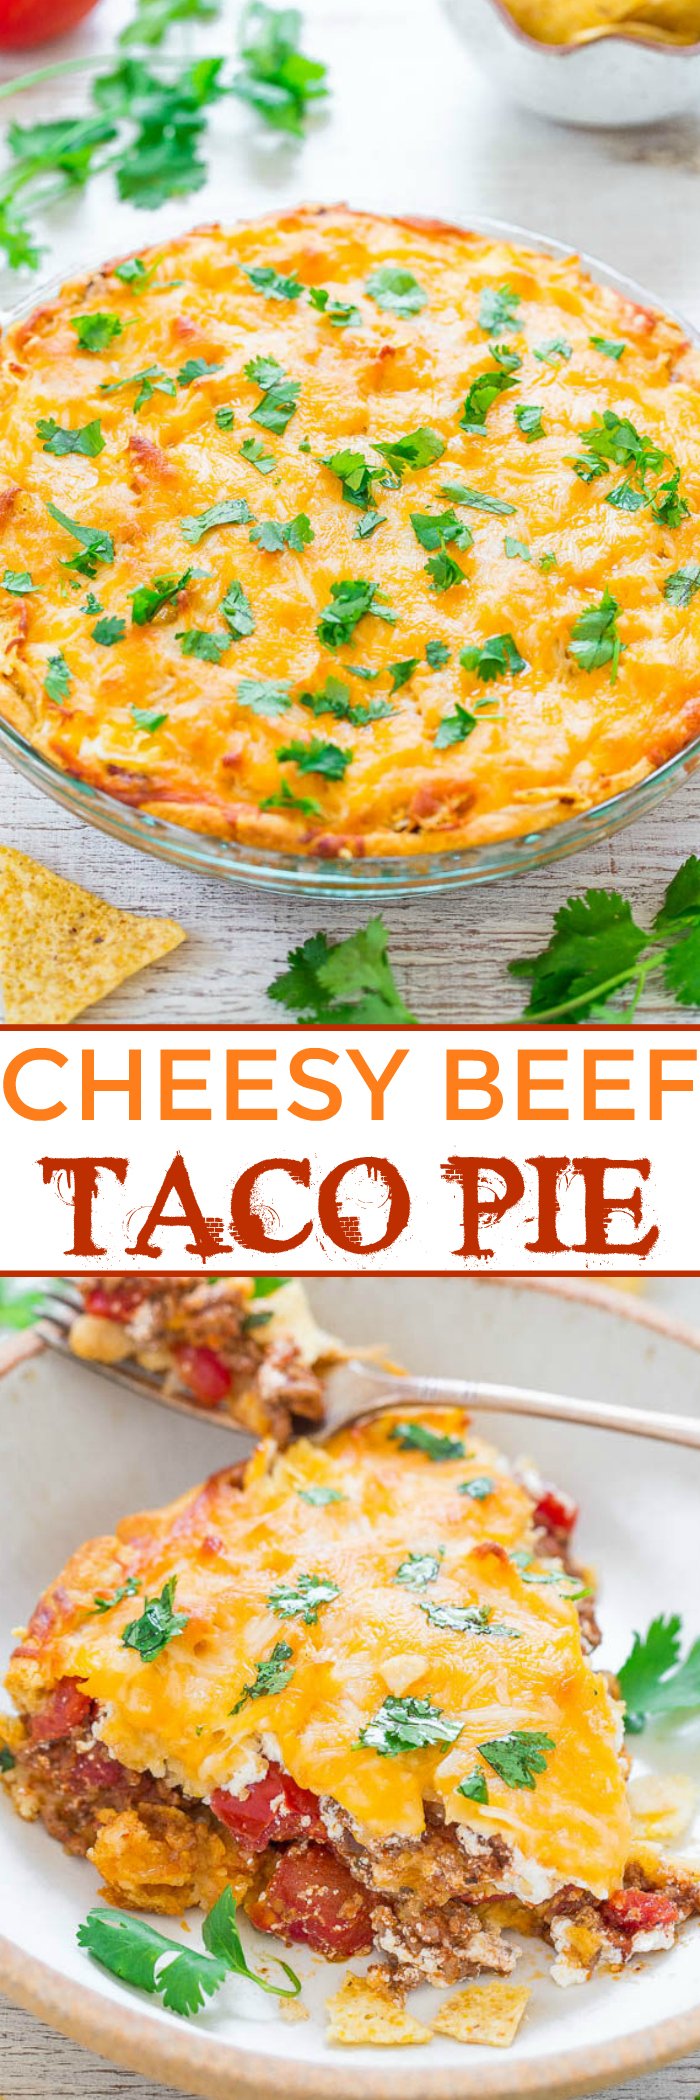 Cheesy Beef Taco Pie - Your favorite taco ingredients baked into a savory, CHEESY pie!! Ground beef, tomatoes, tortilla chips, and more! Great for parties, tailgating, or EASY family dinners and everyone loves it!!